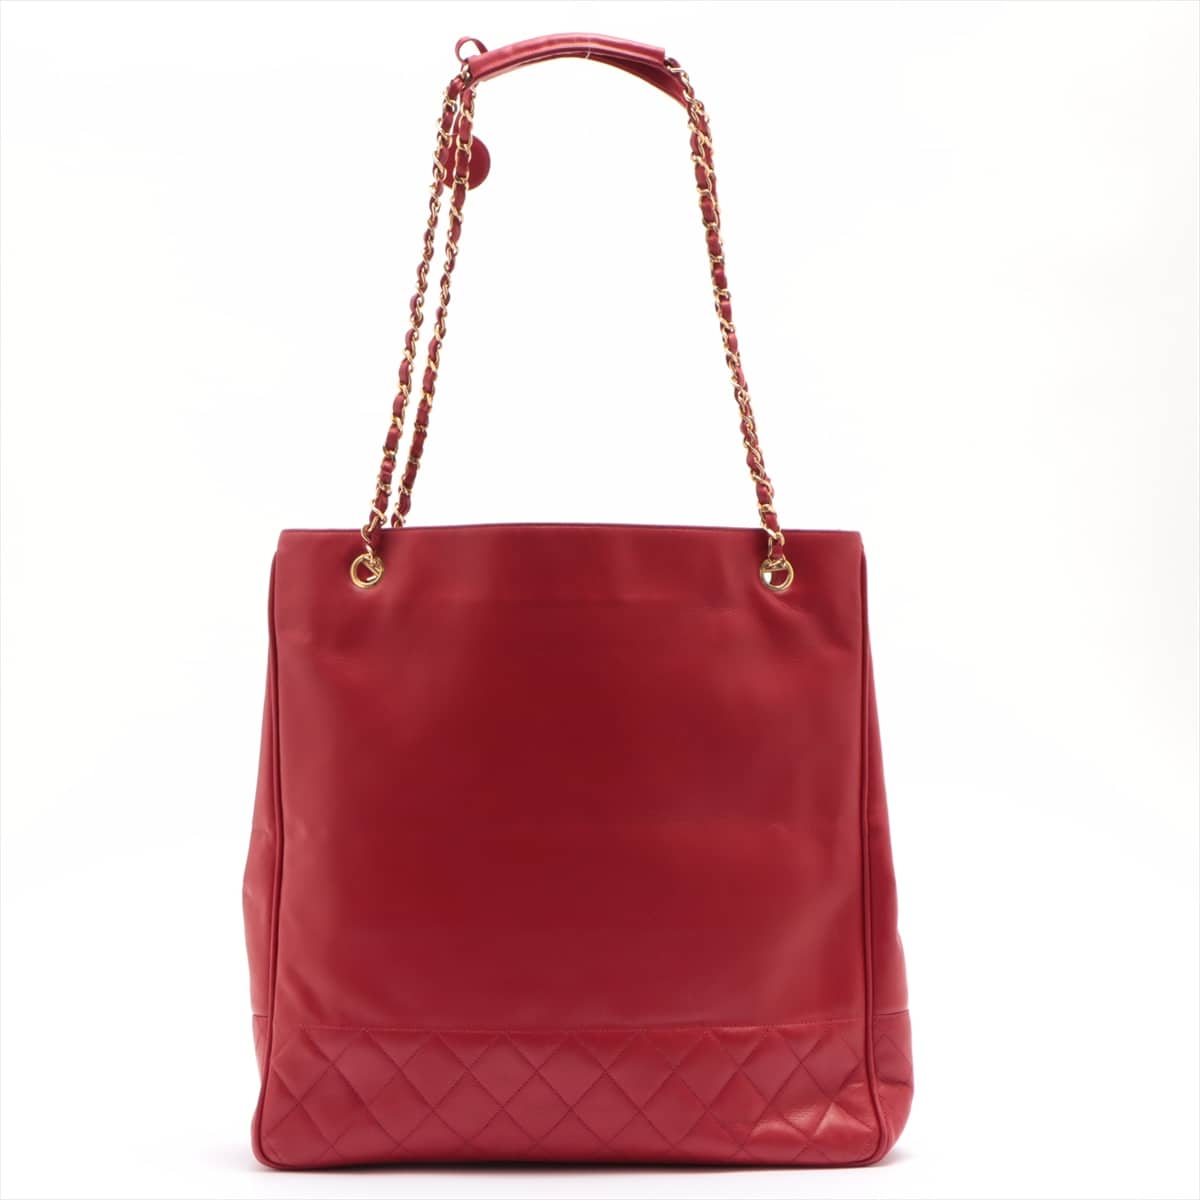 Chanel Vintage Lambskin Chain tote bag Red Gold Metal fittings 0 series